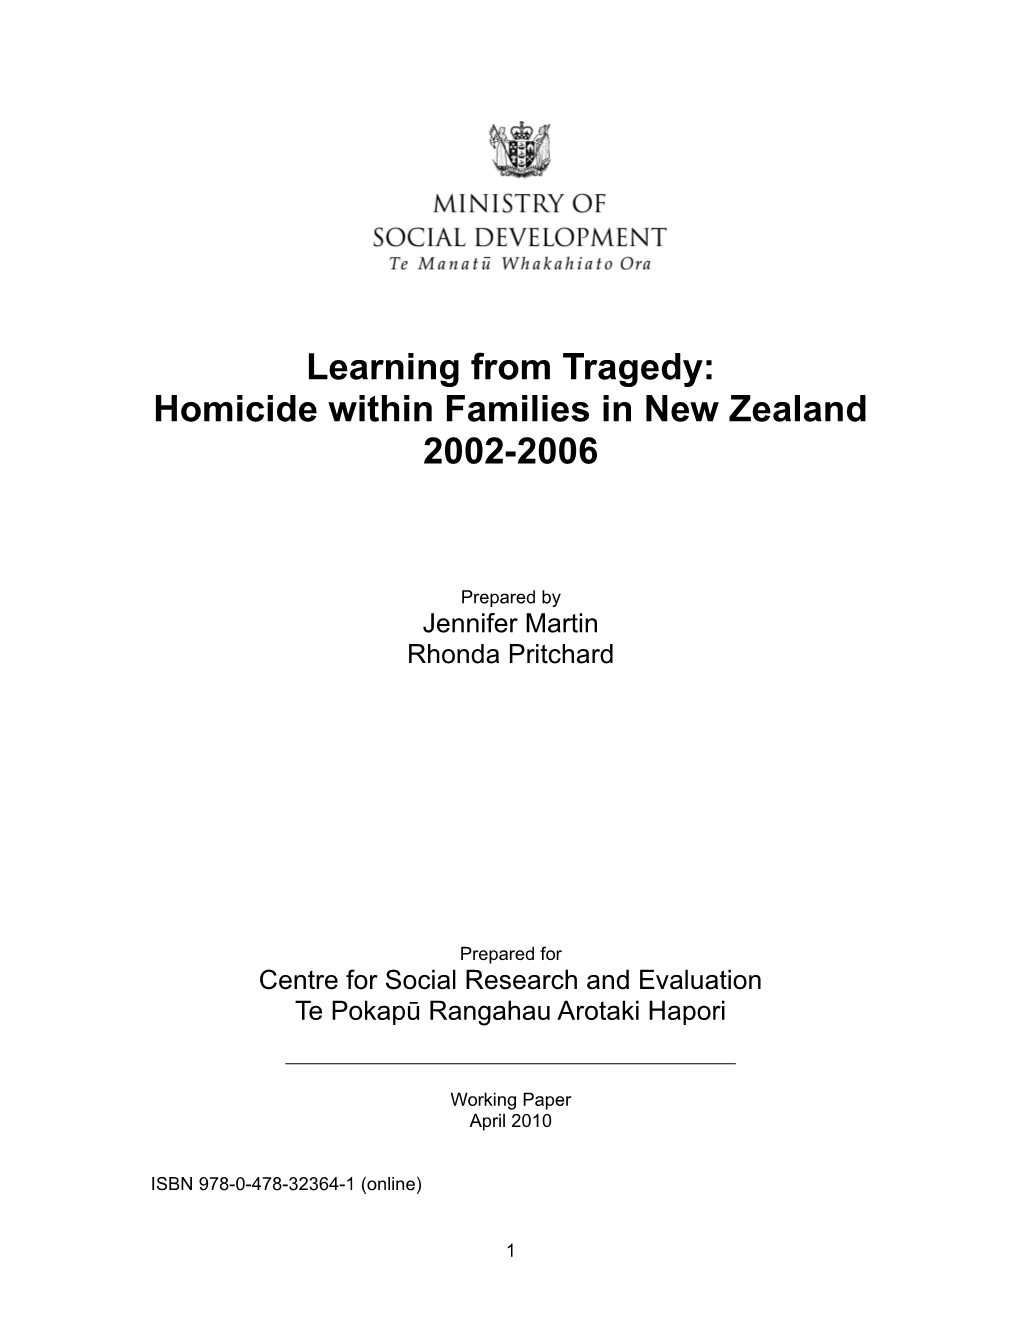 Homicide Within Families in New Zealand